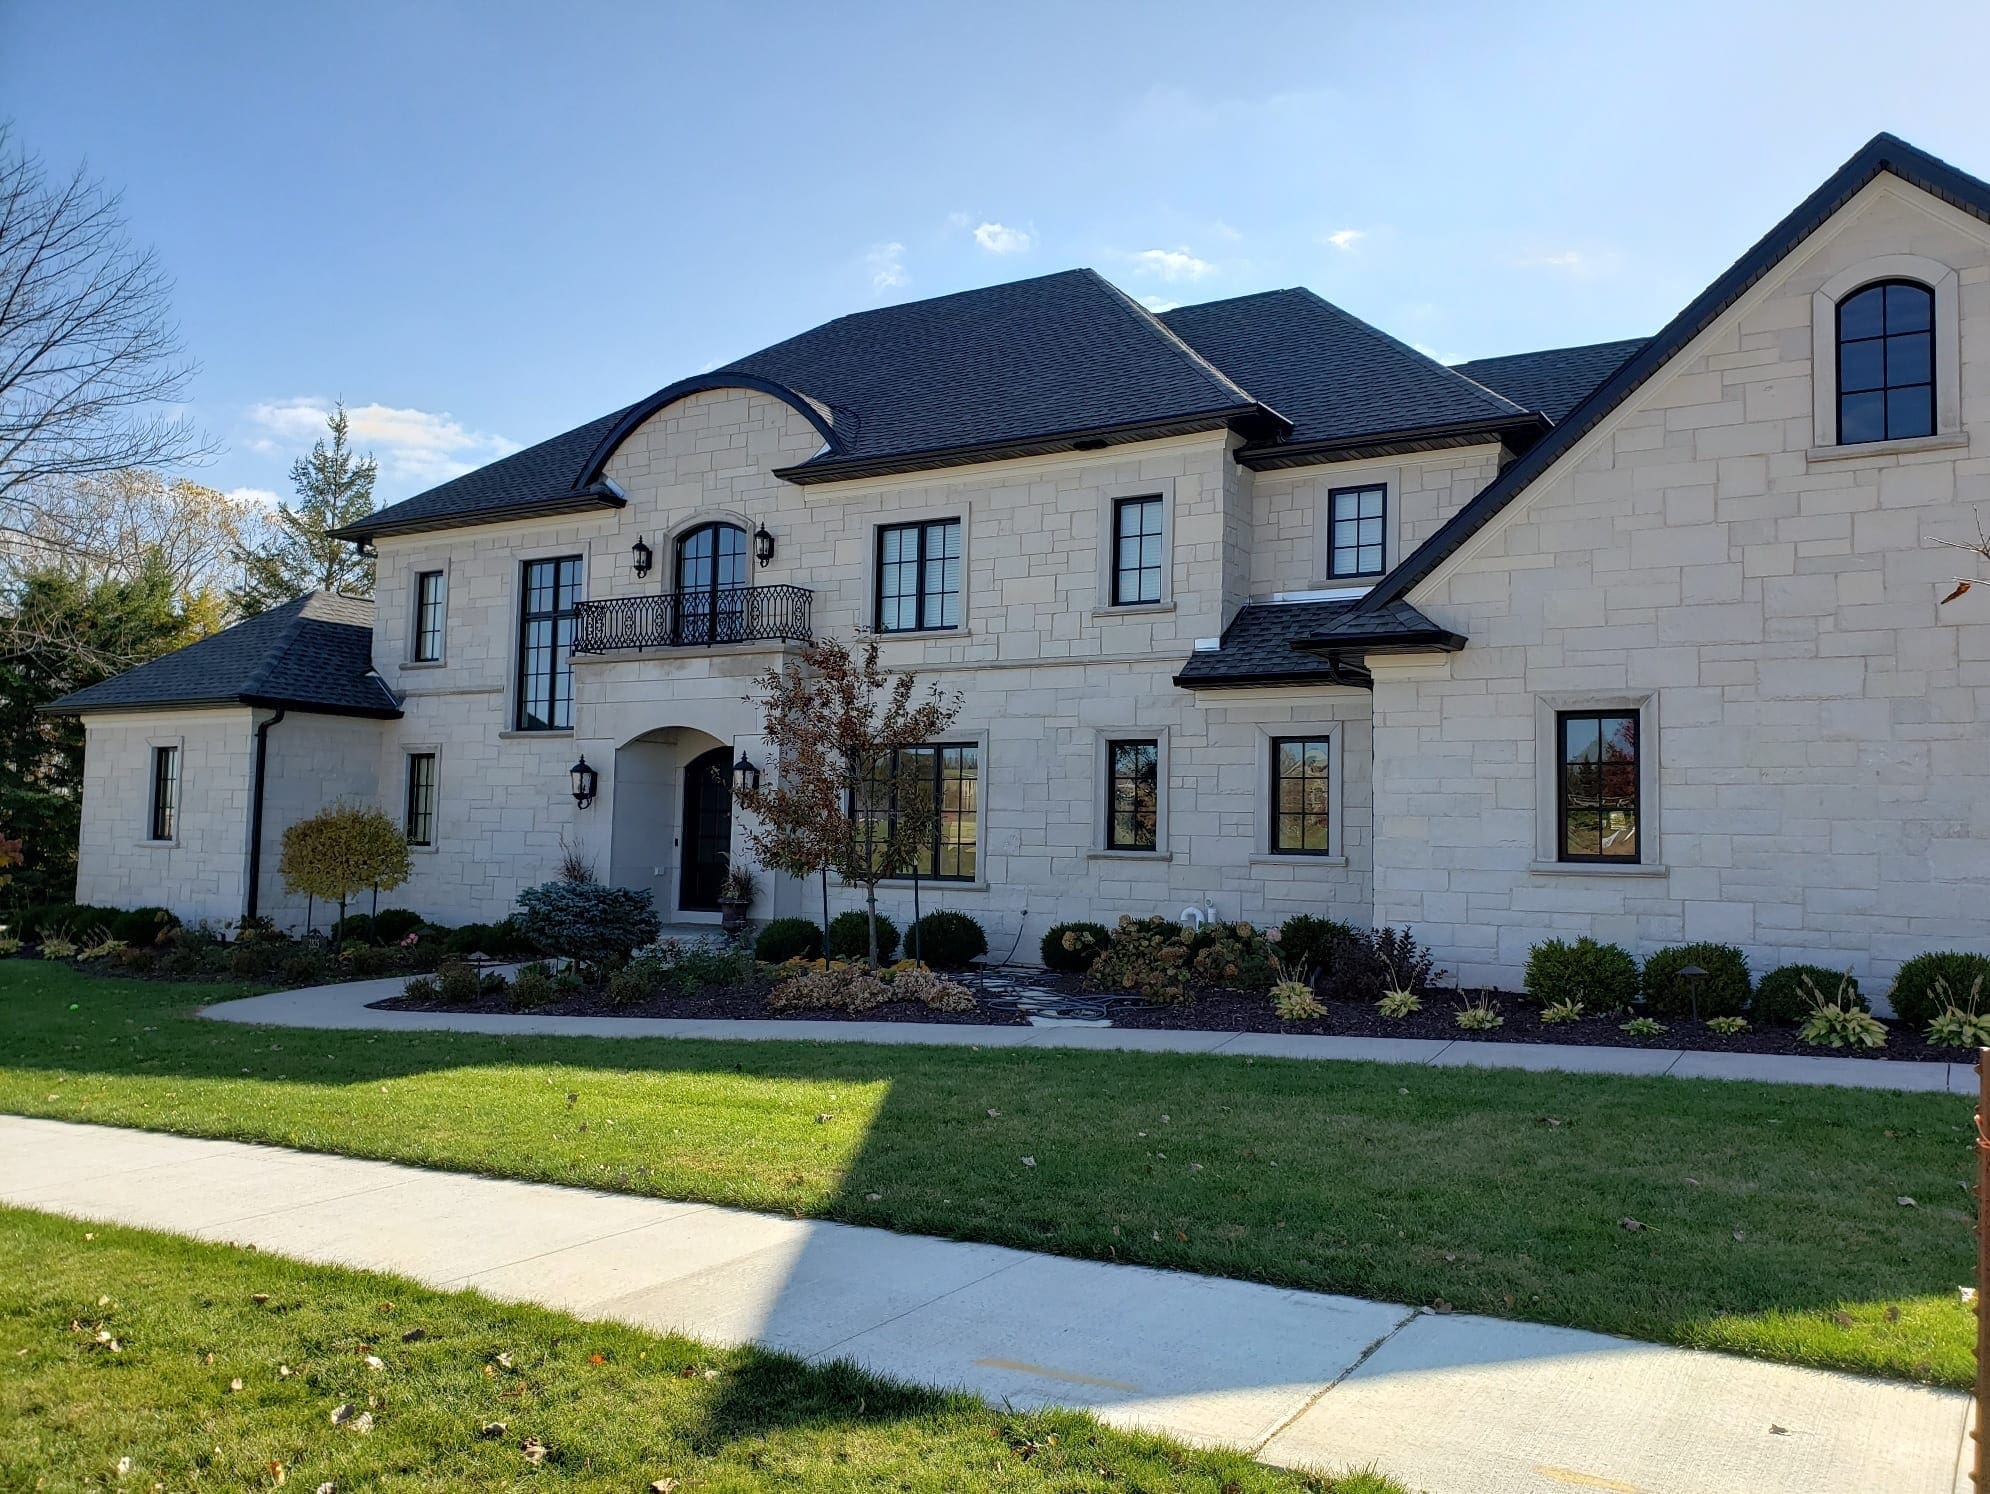 Curb View of Home with Alpine Real Thin Stone Veneer